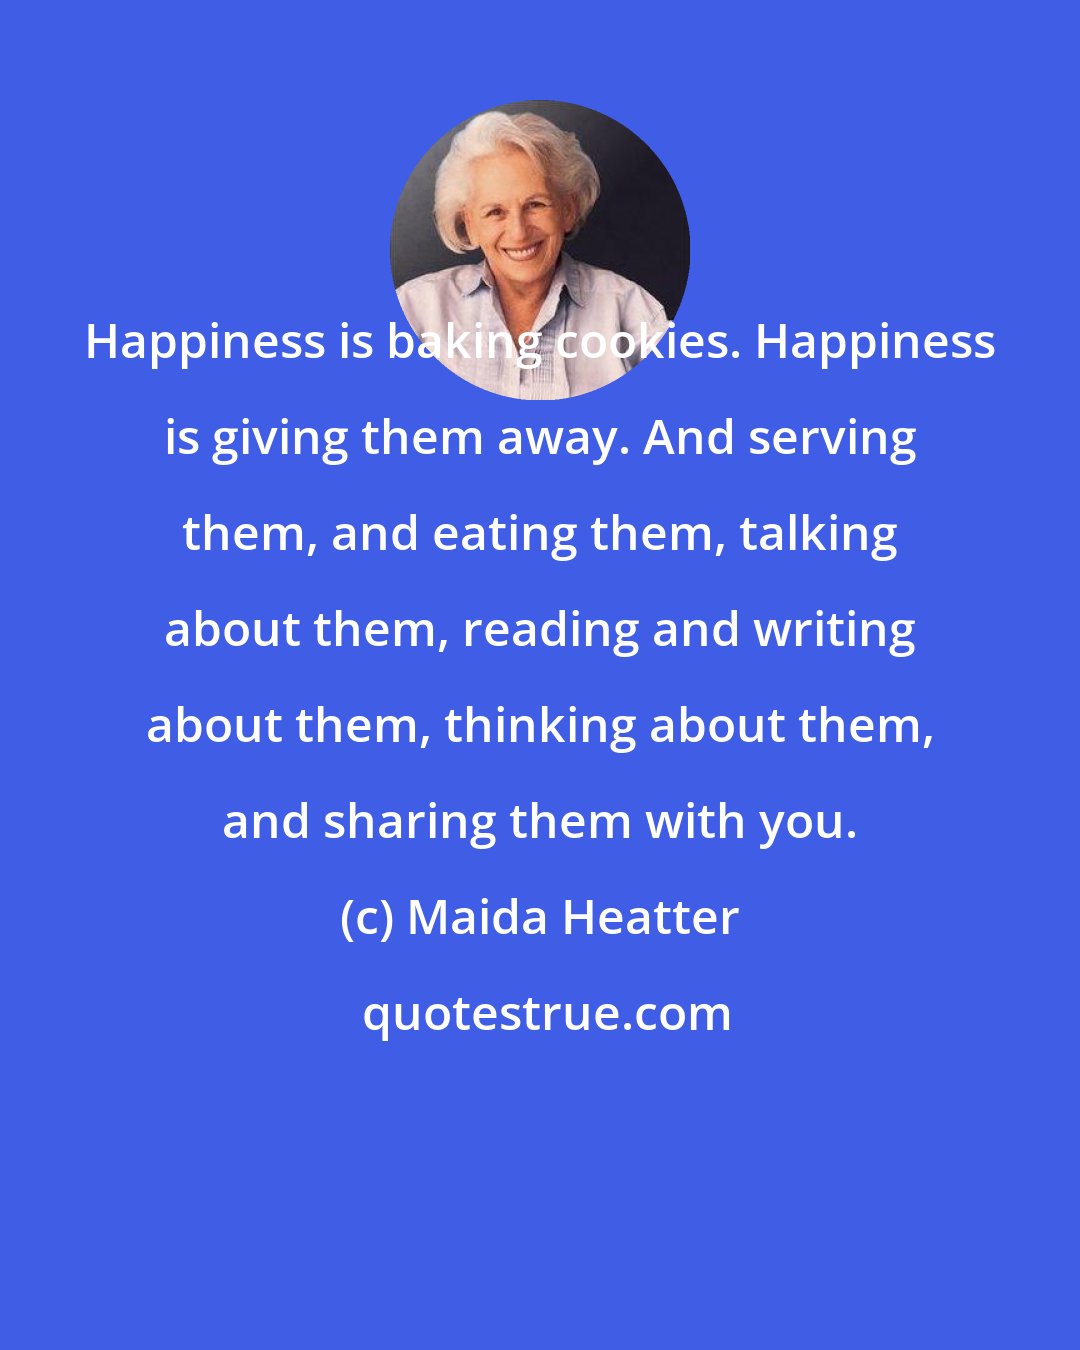 Maida Heatter: Happiness is baking cookies. Happiness is giving them away. And serving them, and eating them, talking about them, reading and writing about them, thinking about them, and sharing them with you.